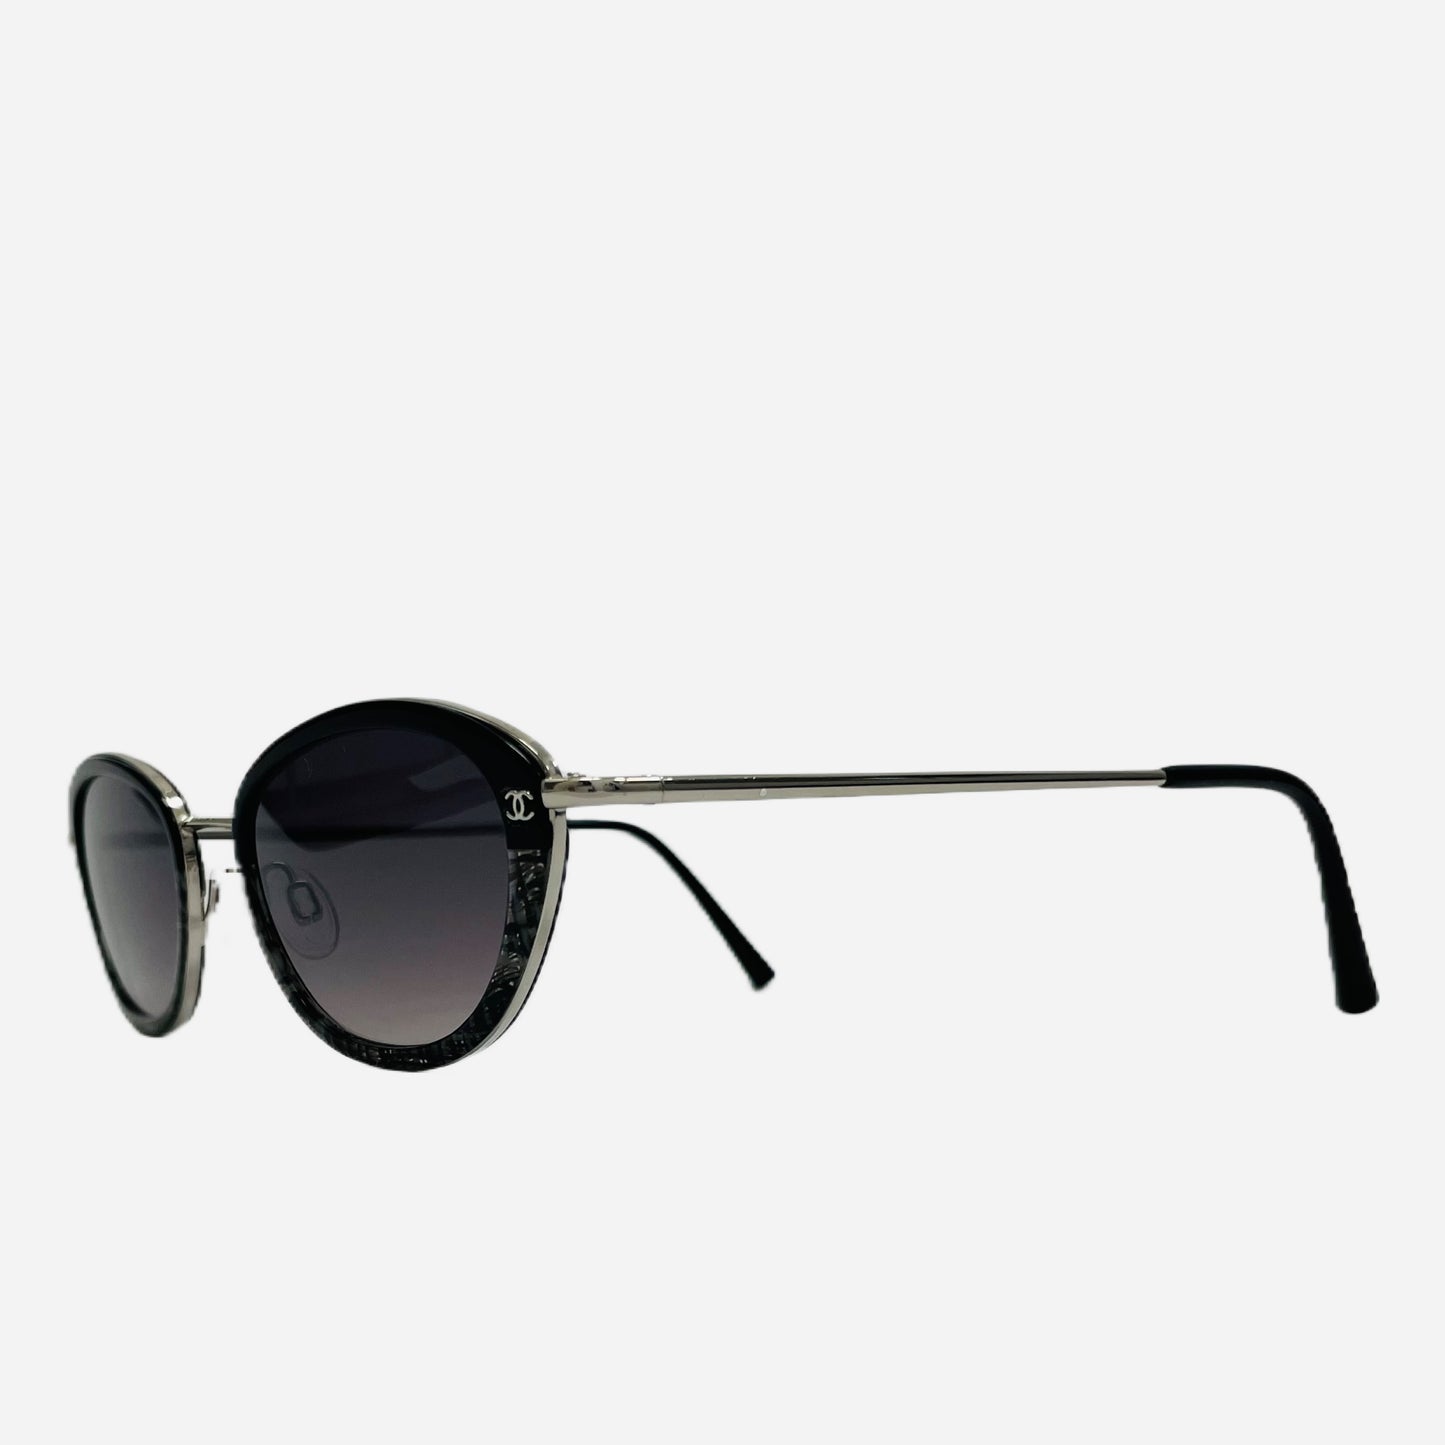 The-Seekers-Vintage-Coco-Chanel-Sunglasses-Sonnenbrille-Customized-2159-front-side